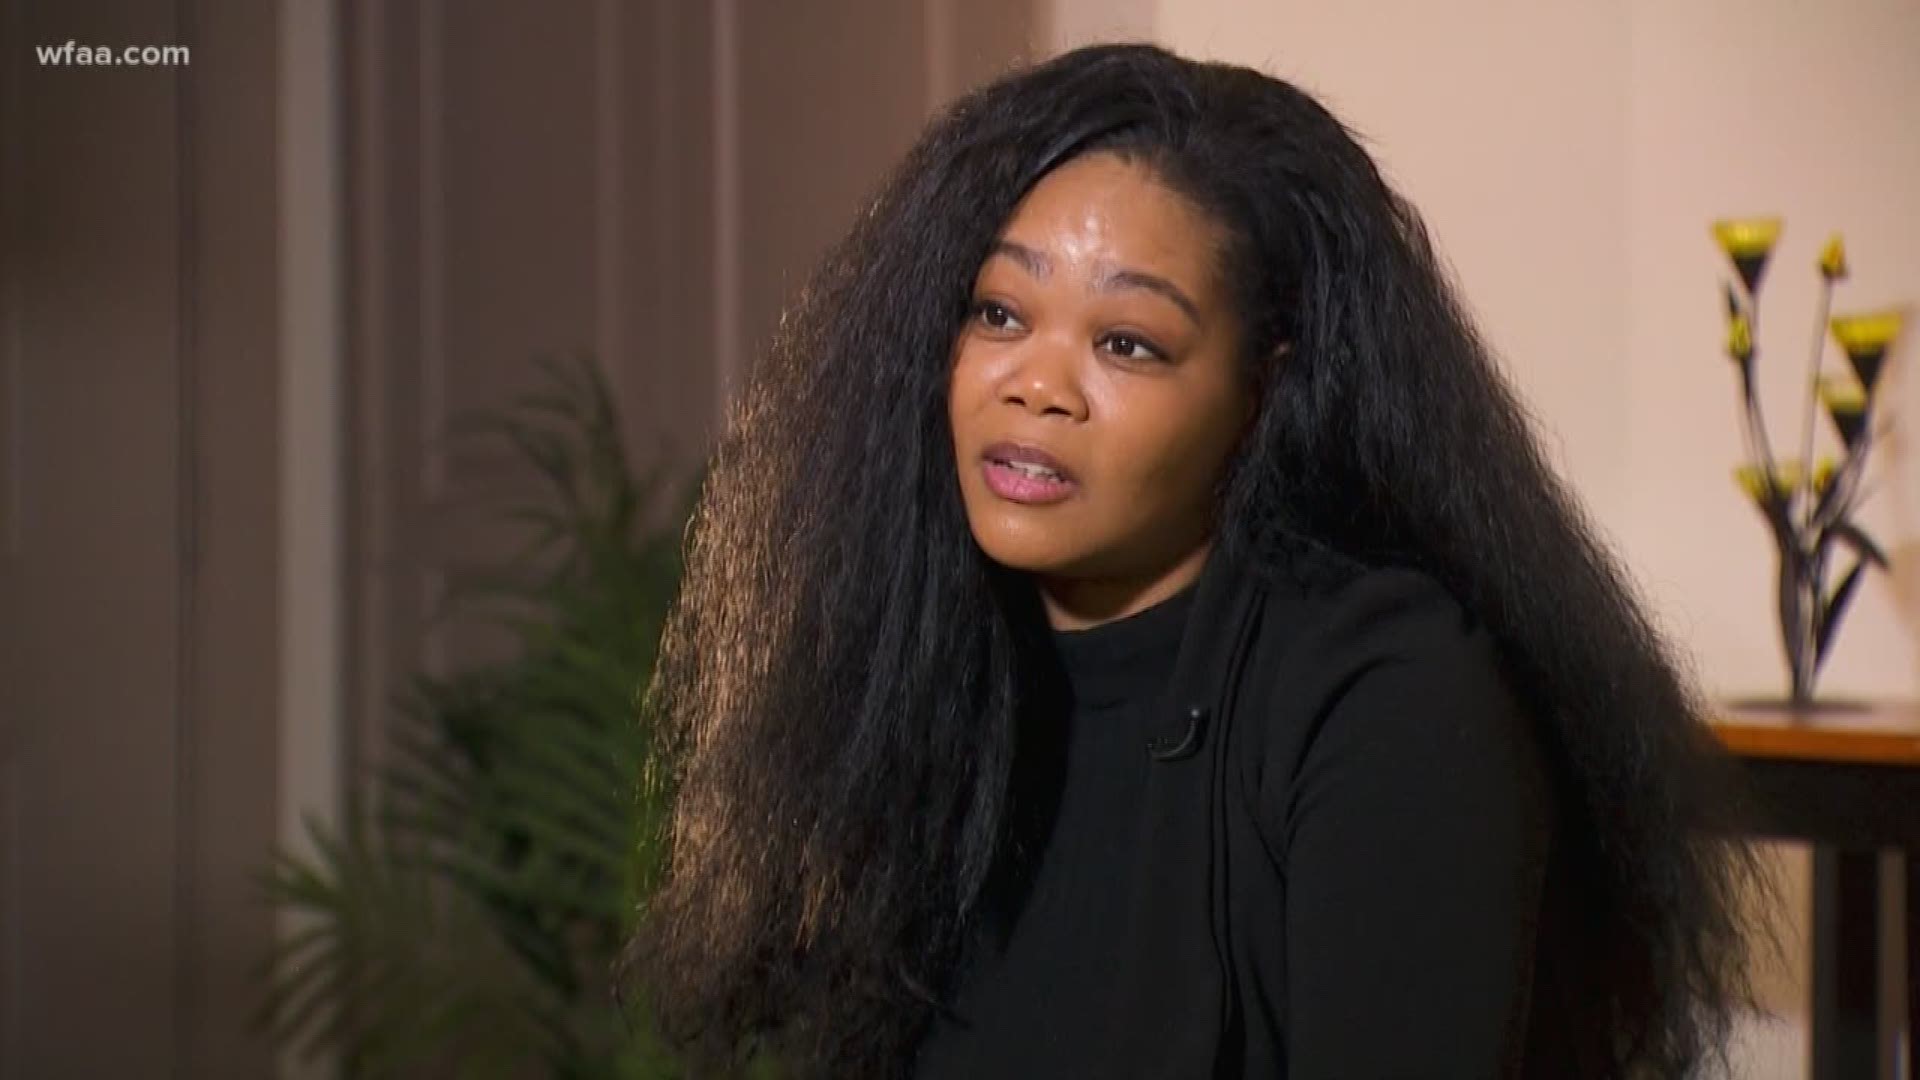 Kitti Jones left her career in Dallas for a relationship with R. Kelly. Now, she's speaking out against the singer in the new 'Surviving R. Kelly' docuseries